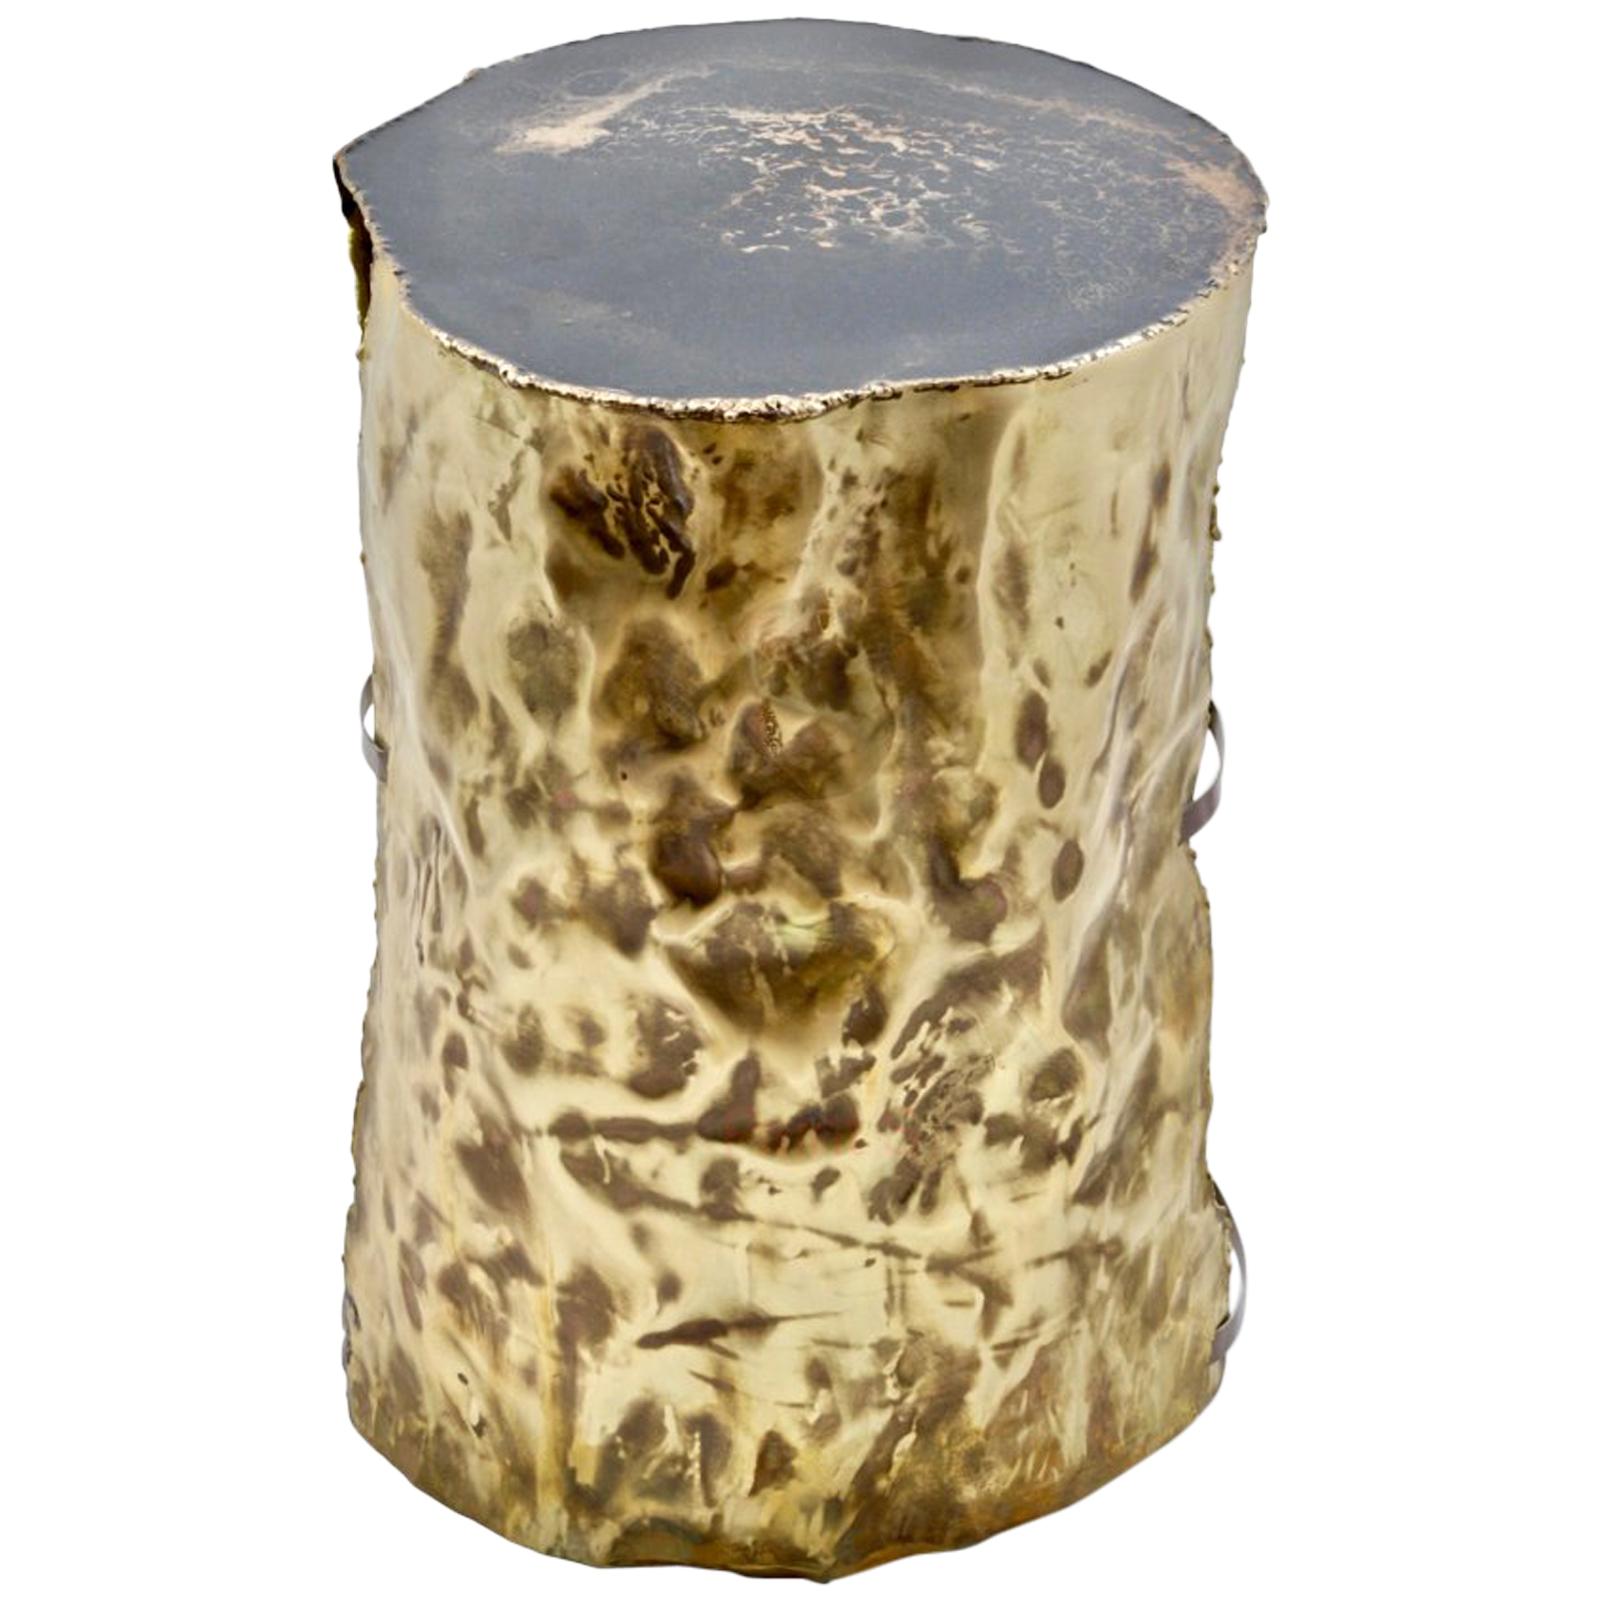 Dal Furlo "Metal tree" Side Table in Hammered Brass and Resin im Angebot